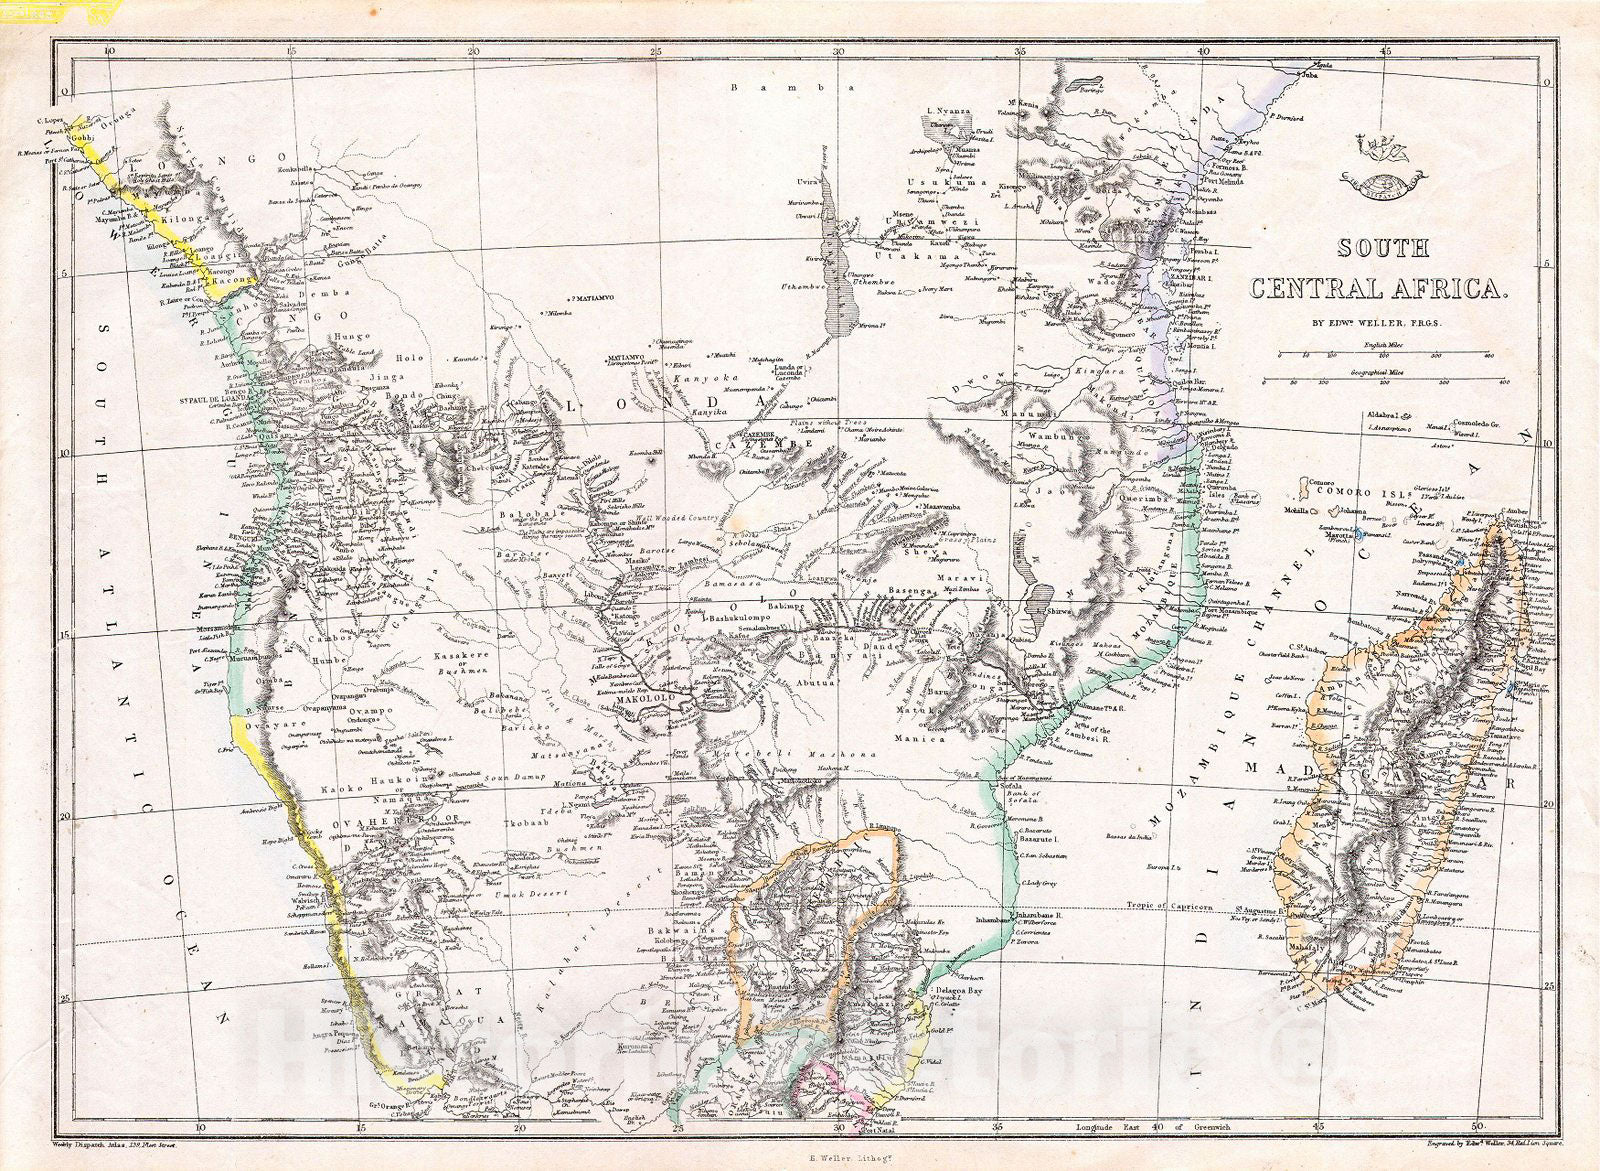 Historic Map : Dispatch, Weller Map of South Central Africa (Angola, Botswana, Tanzania, etc.), 1868, Vintage Wall Art